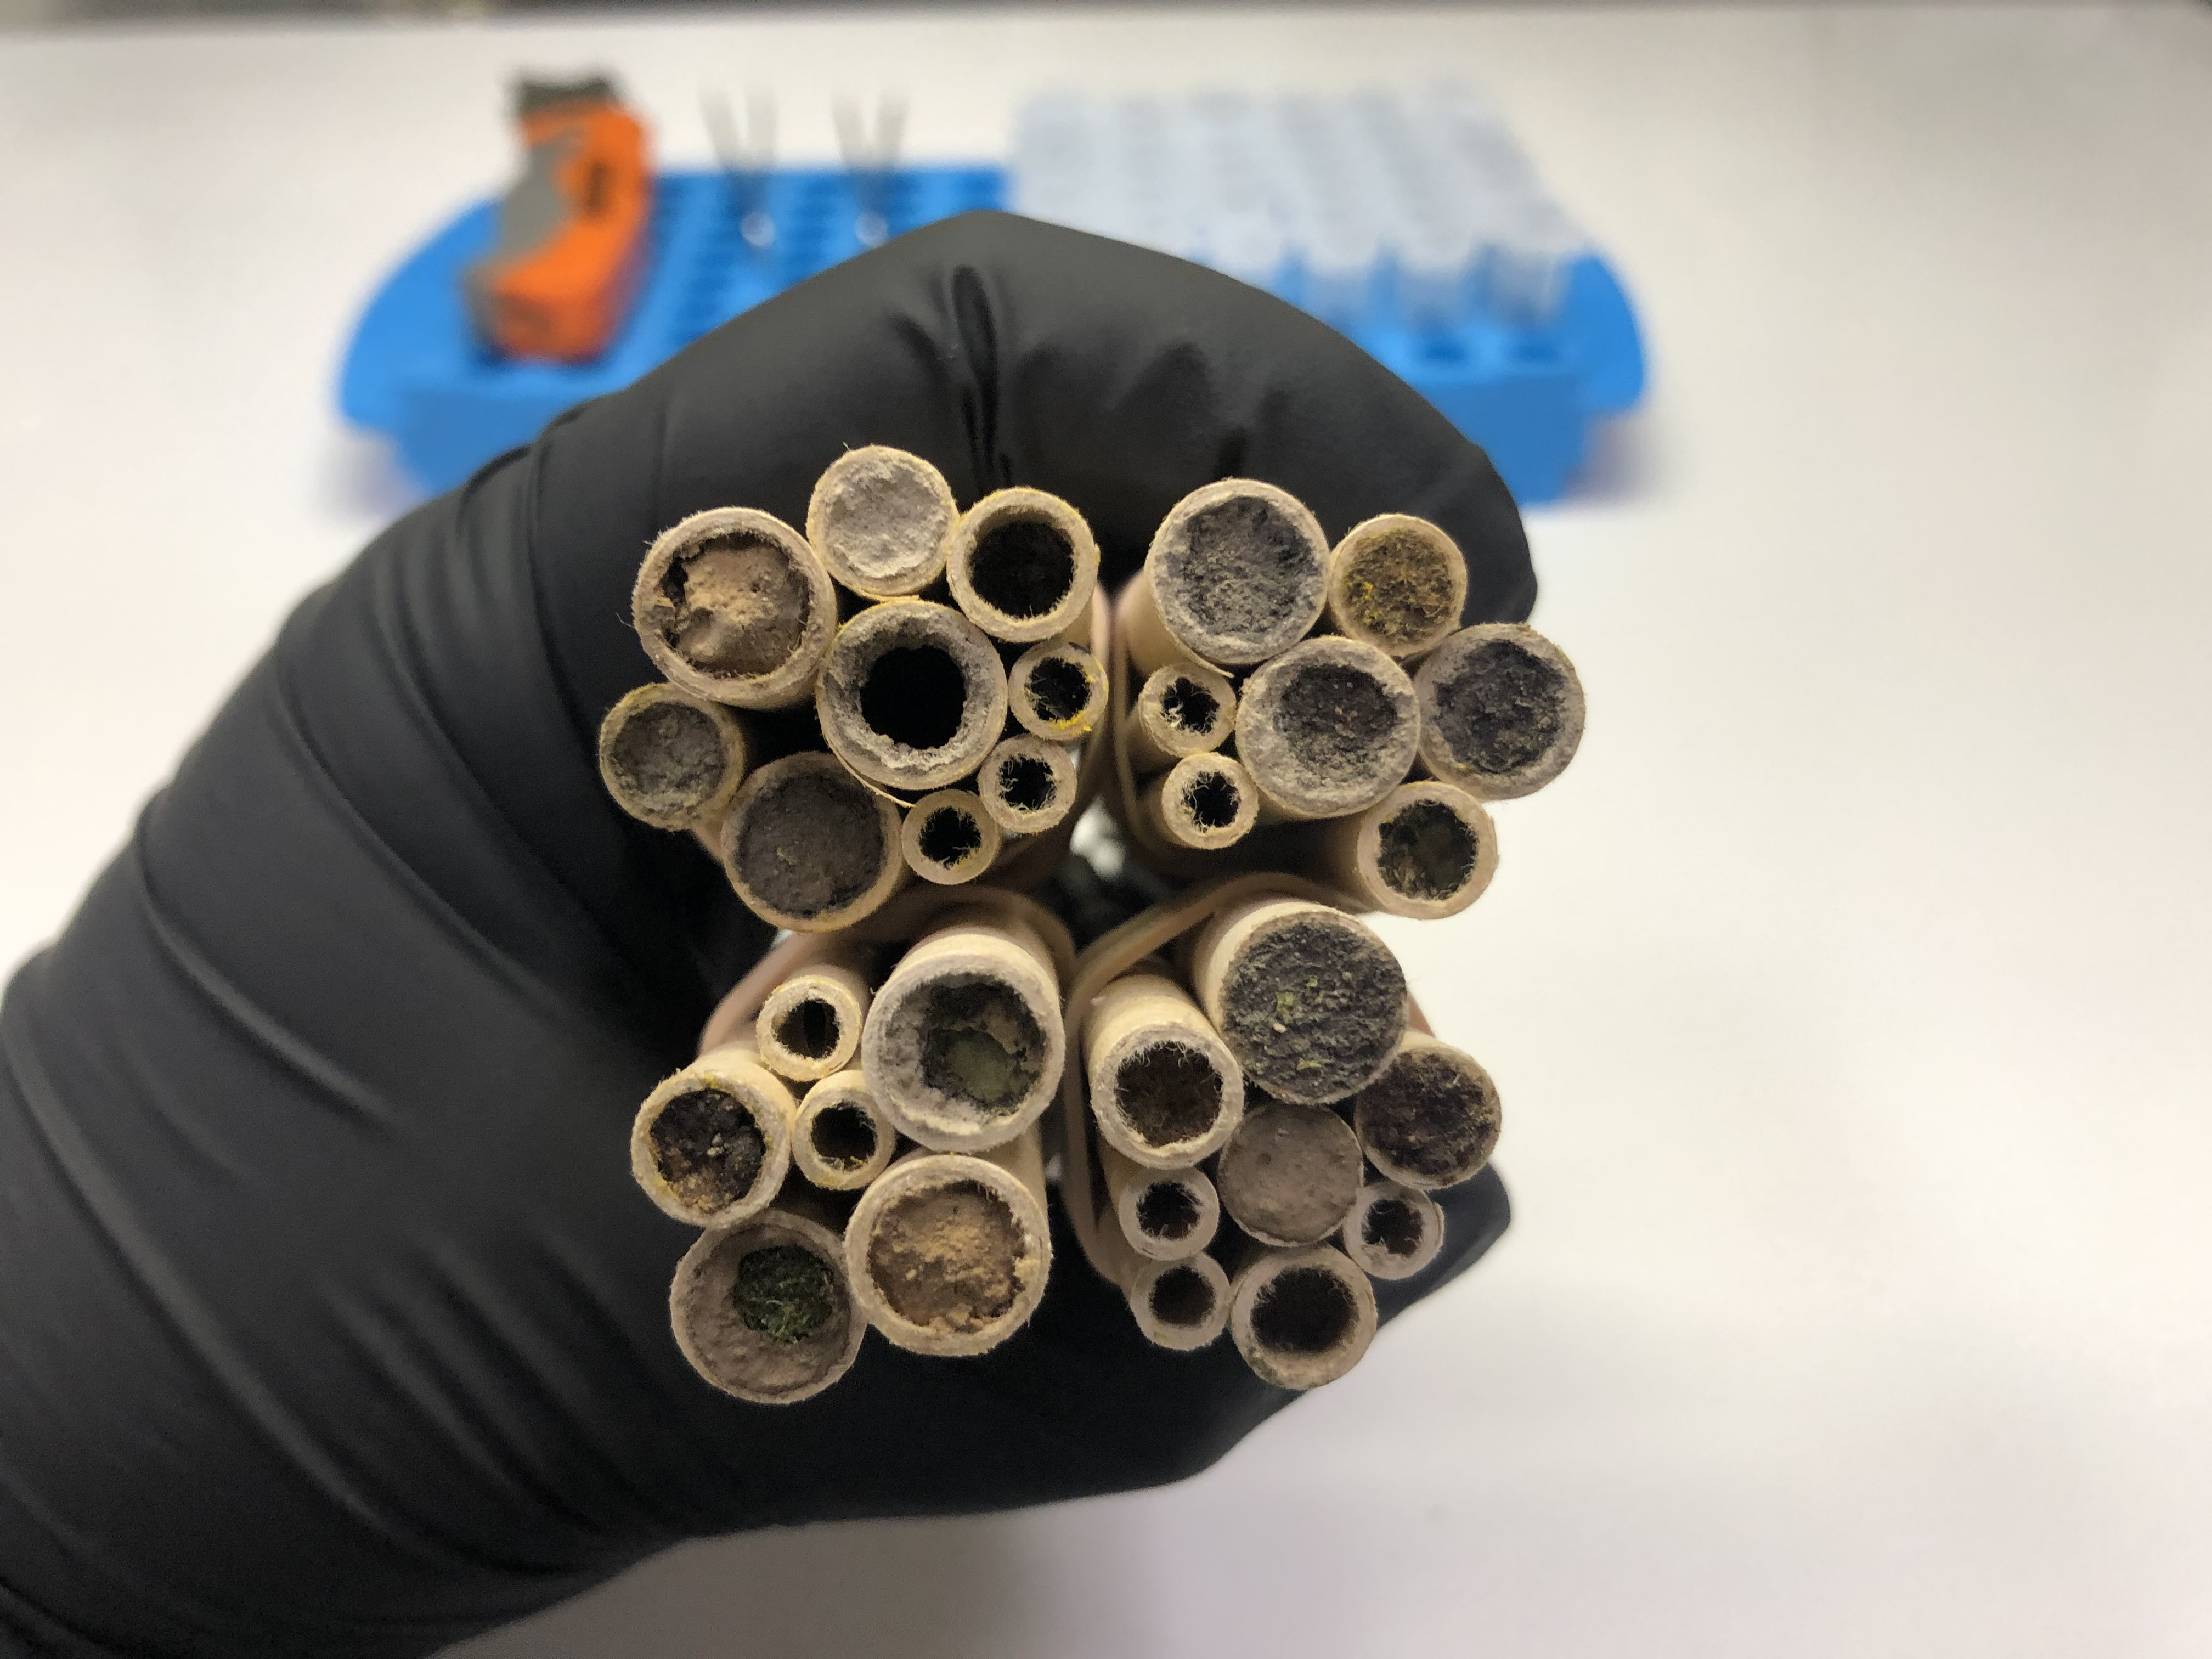 A gloved hand holding cardboard nesting tubes 